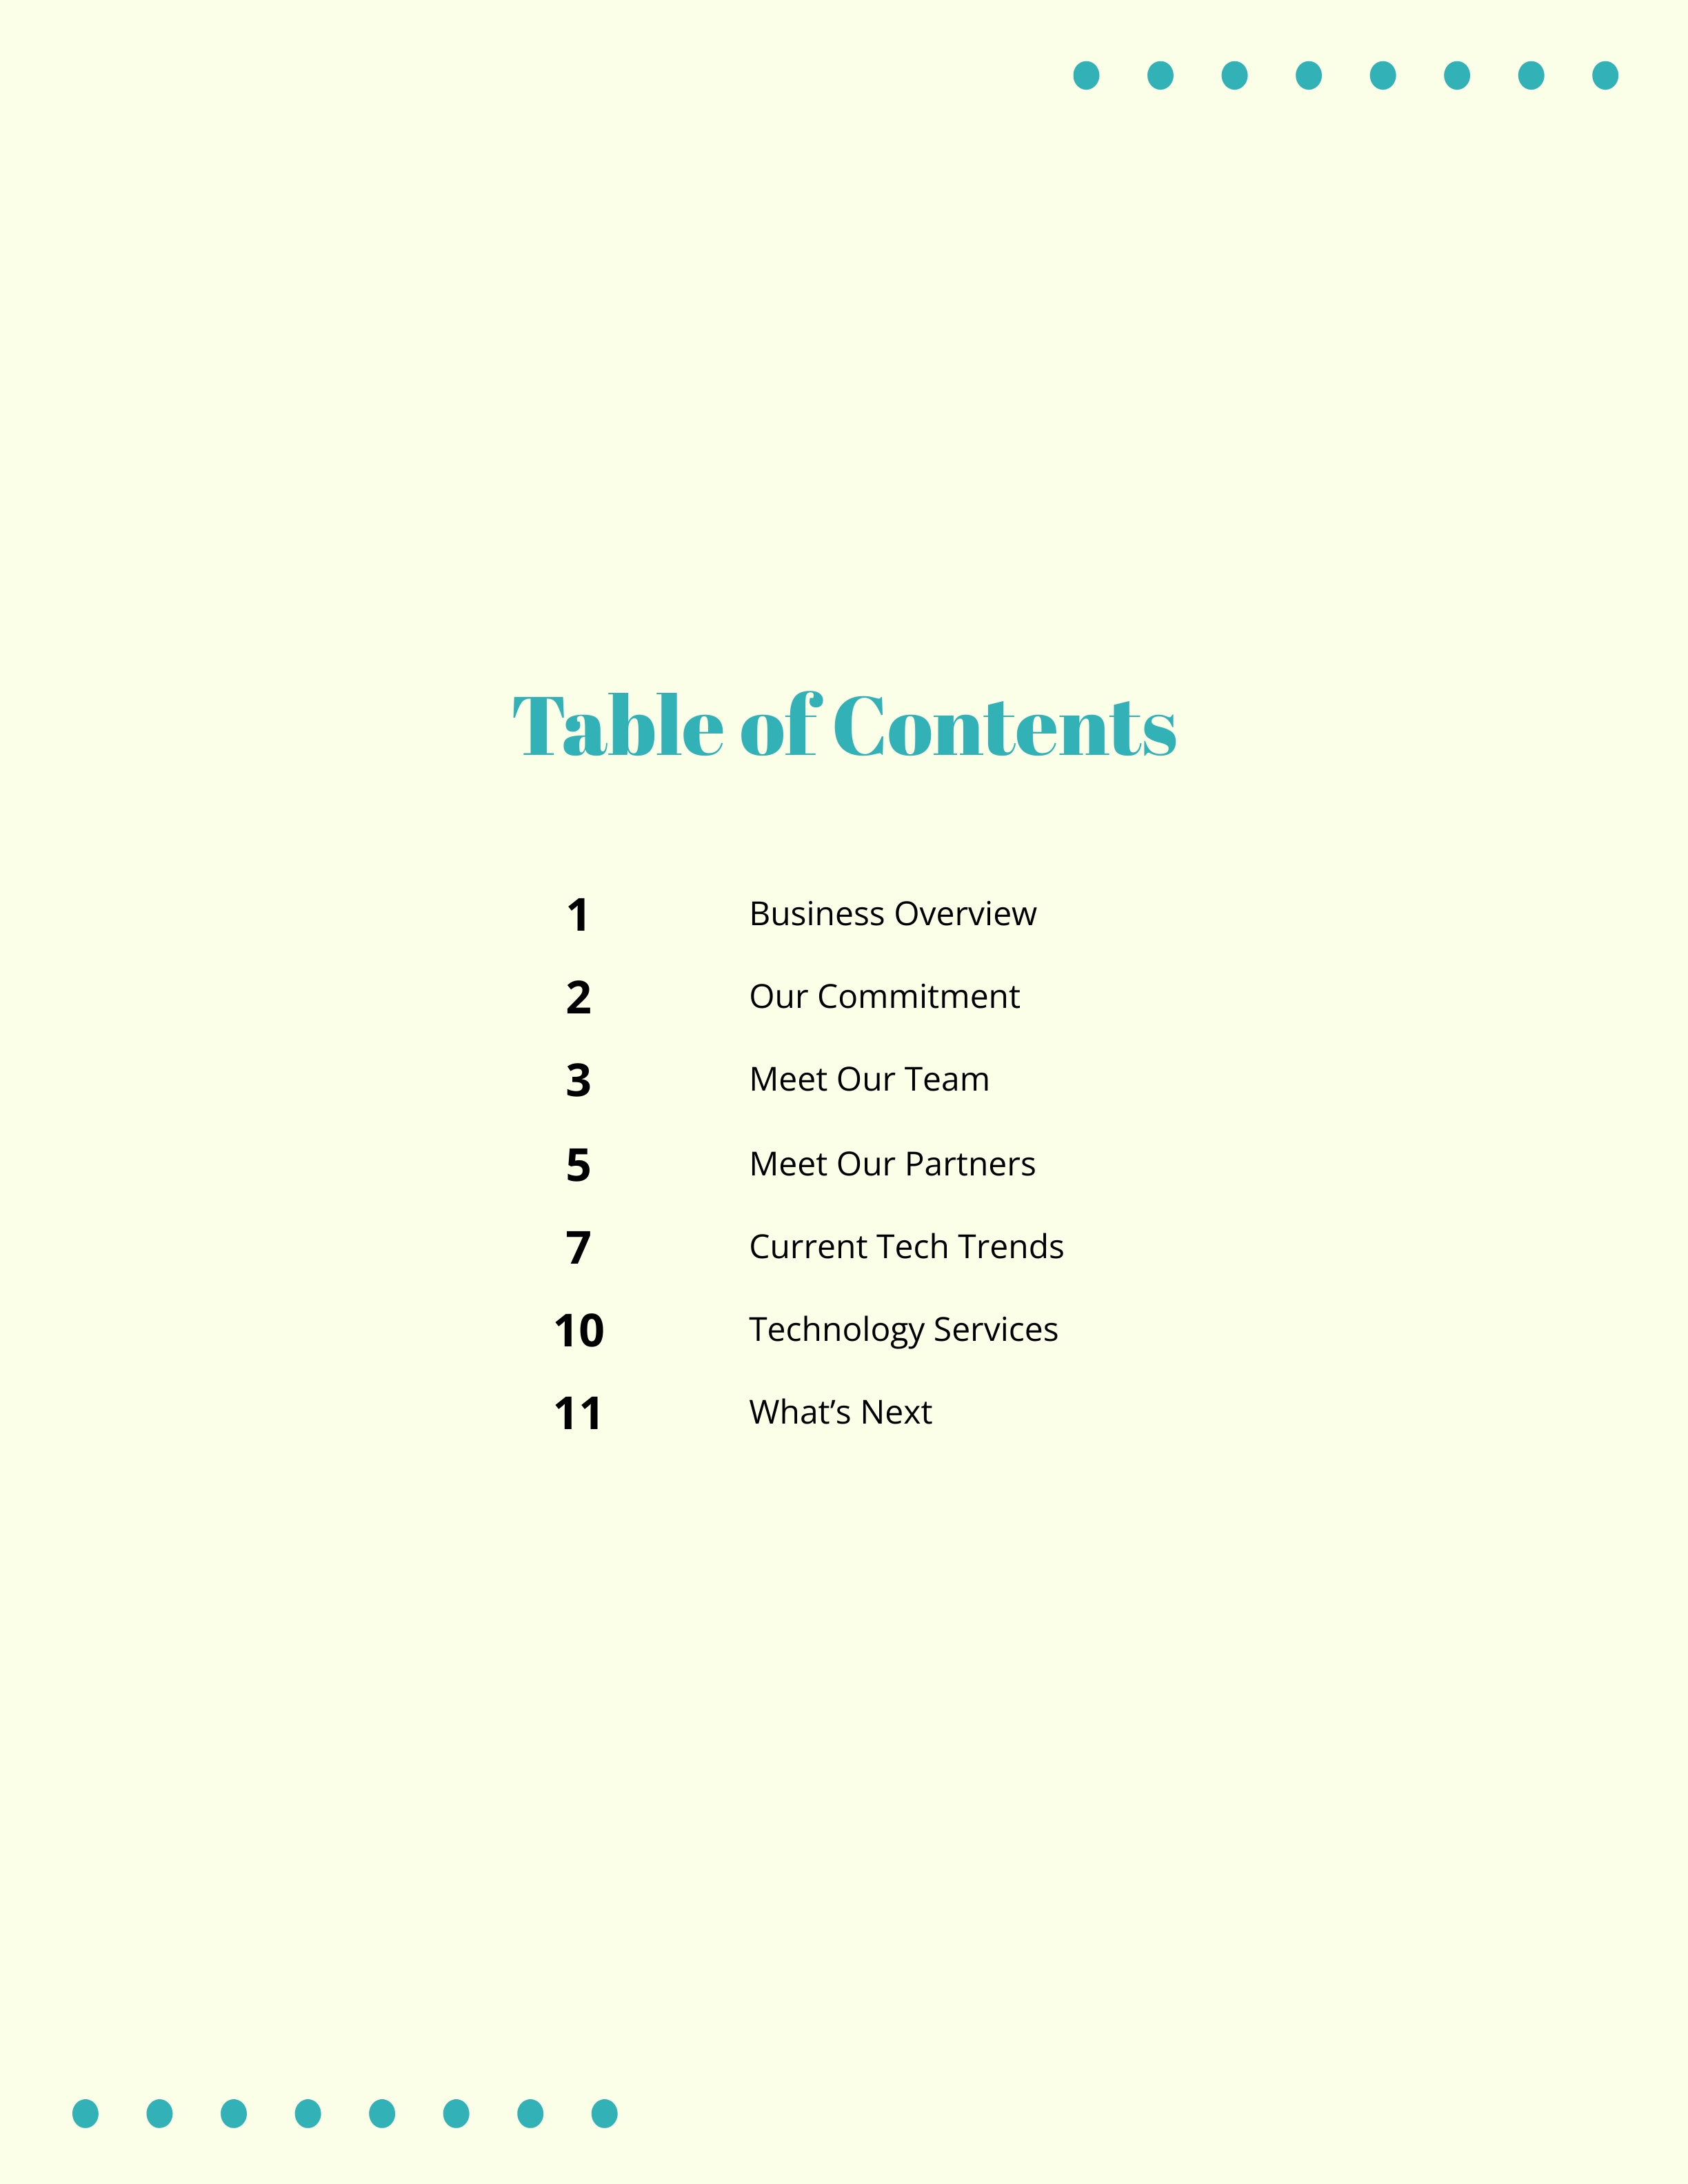 table of content essay